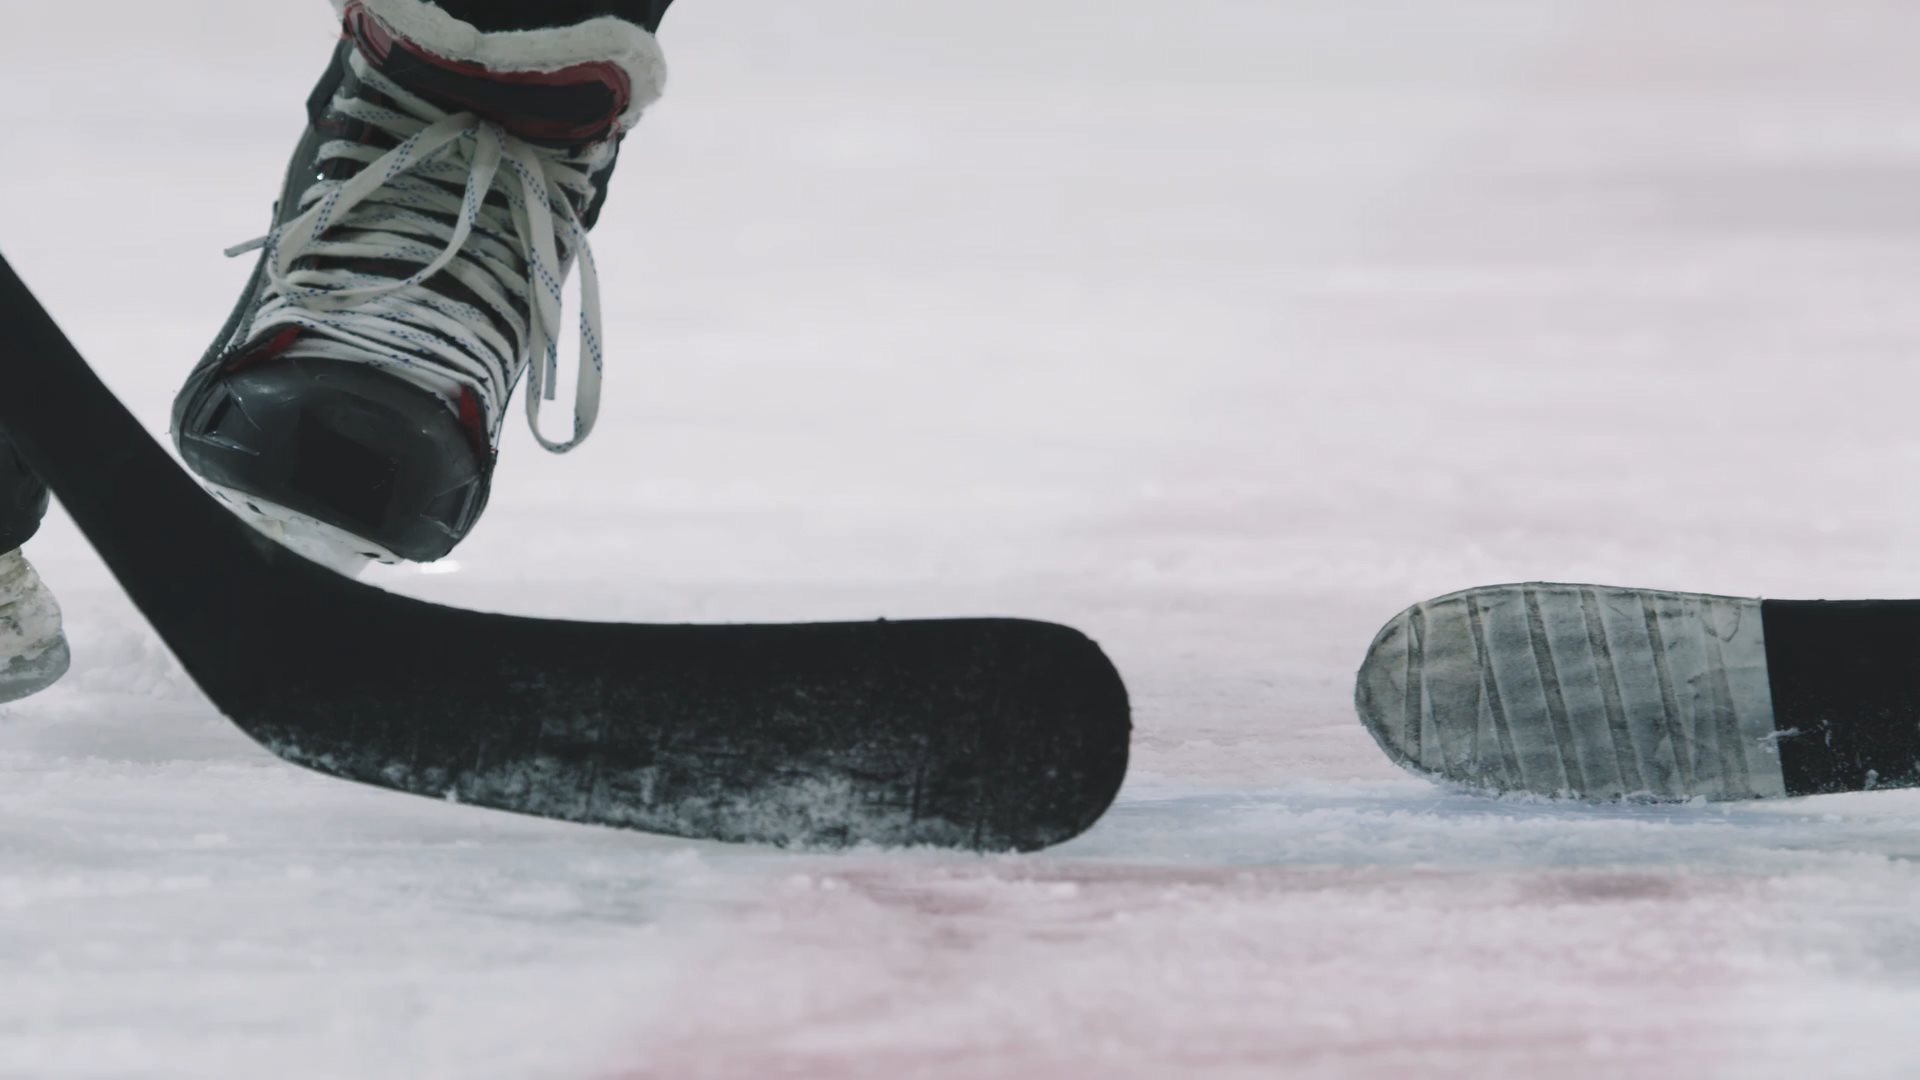 Video of sticks, puck and skates at a Ice Hockey Faceoff